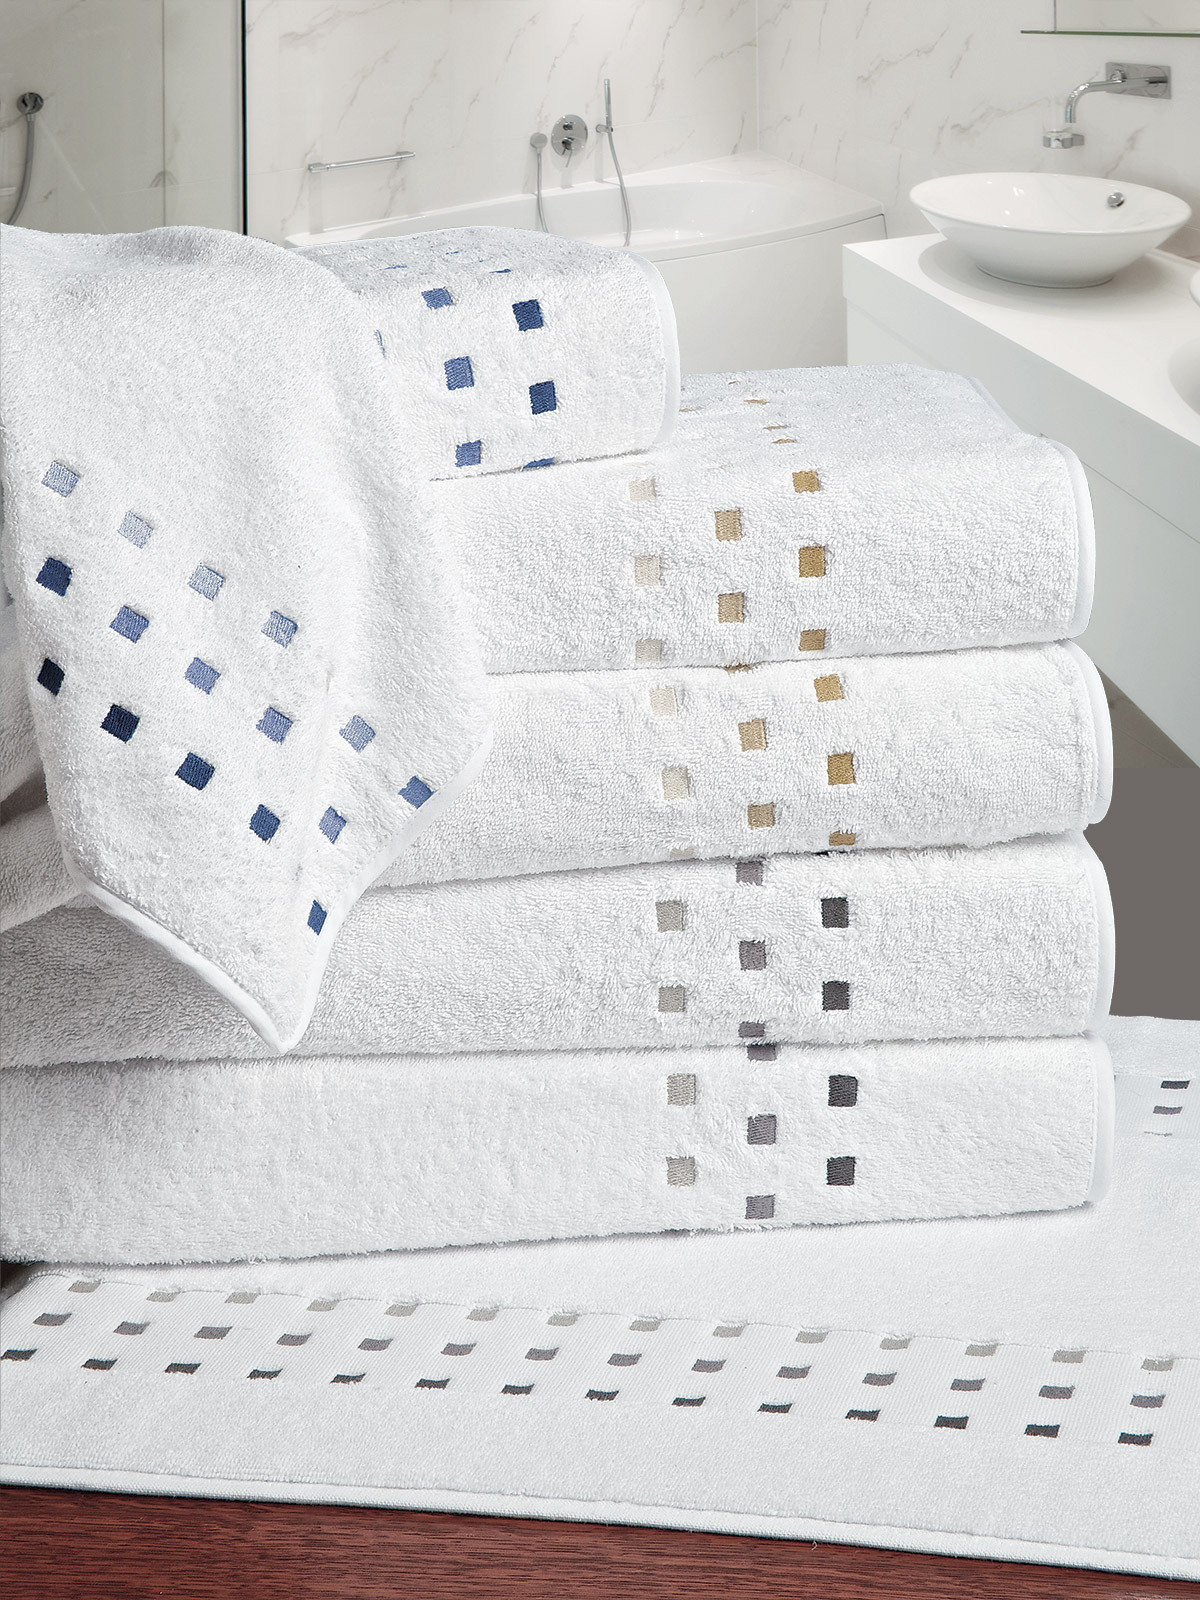 IMAGE OF TOWELS